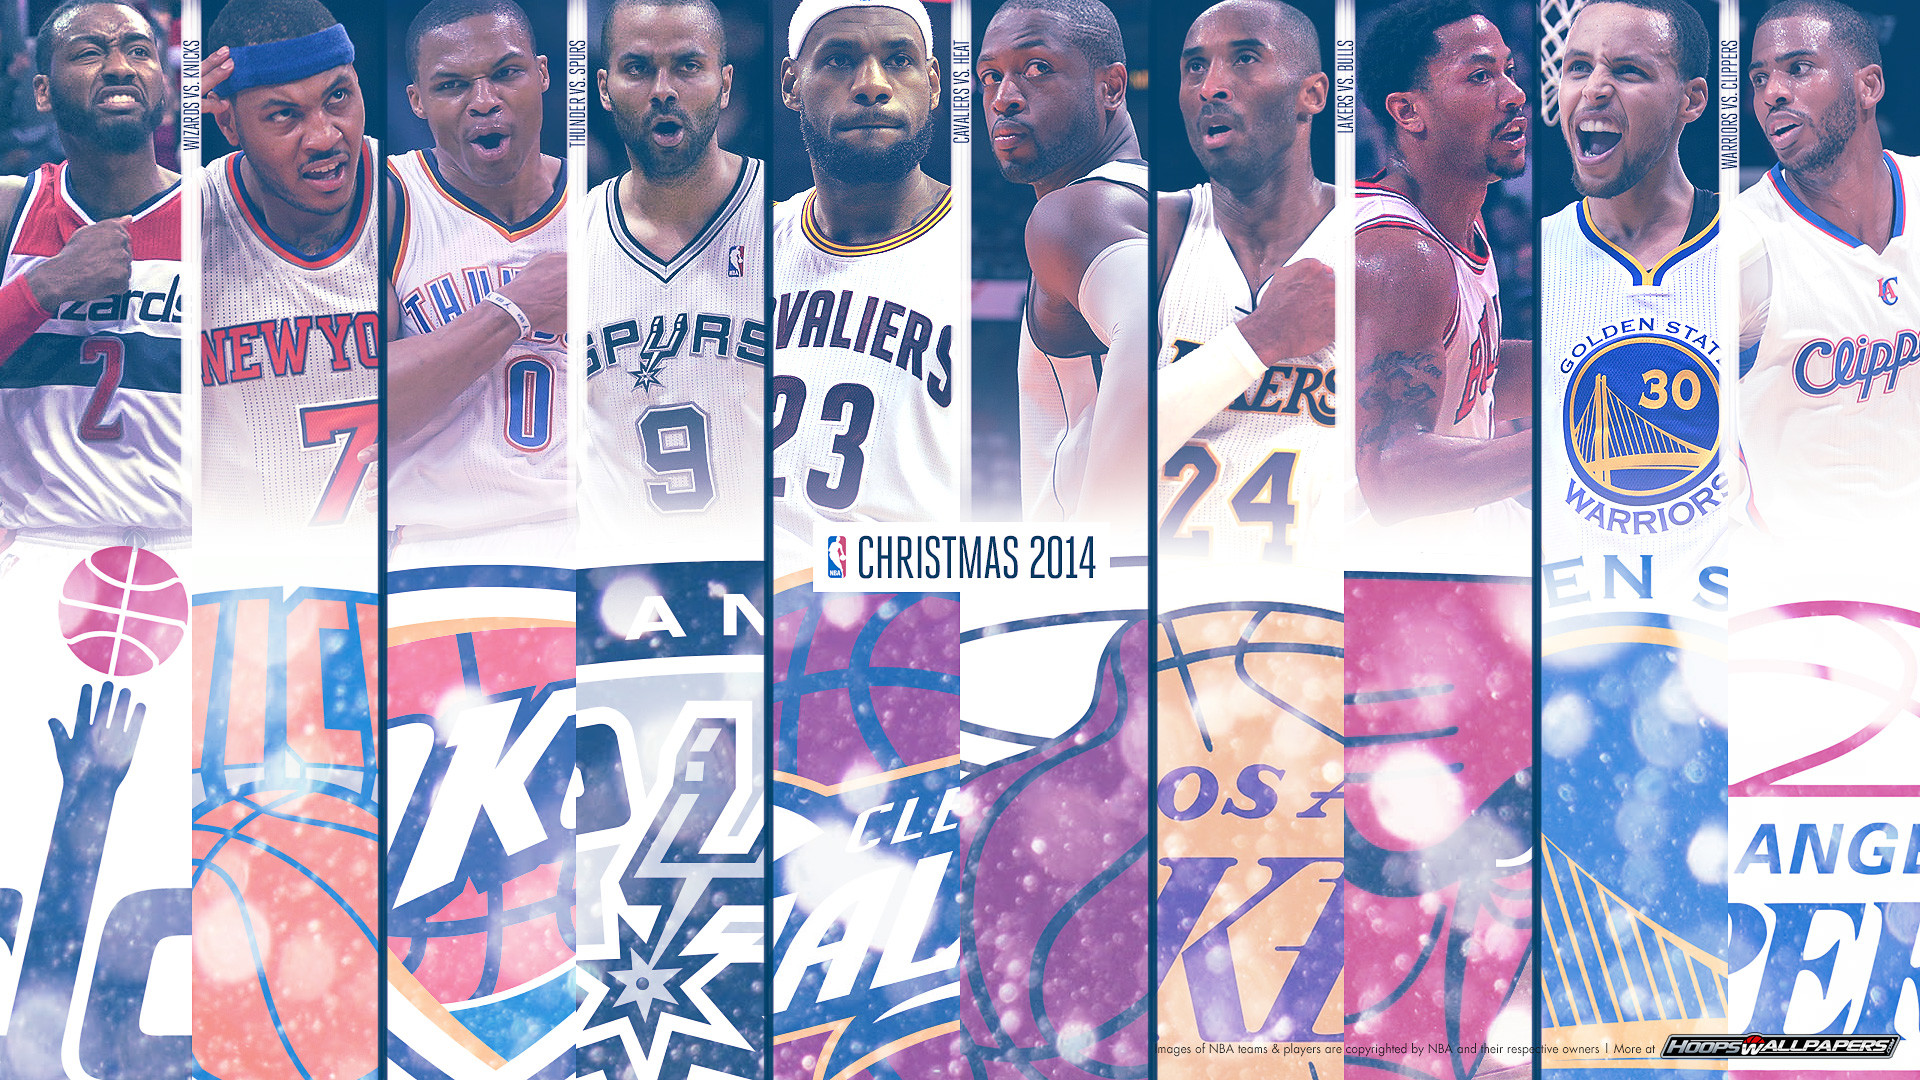 Free NBA Wallpapers At HoopsWallpapers.com; Newest NBA And ..